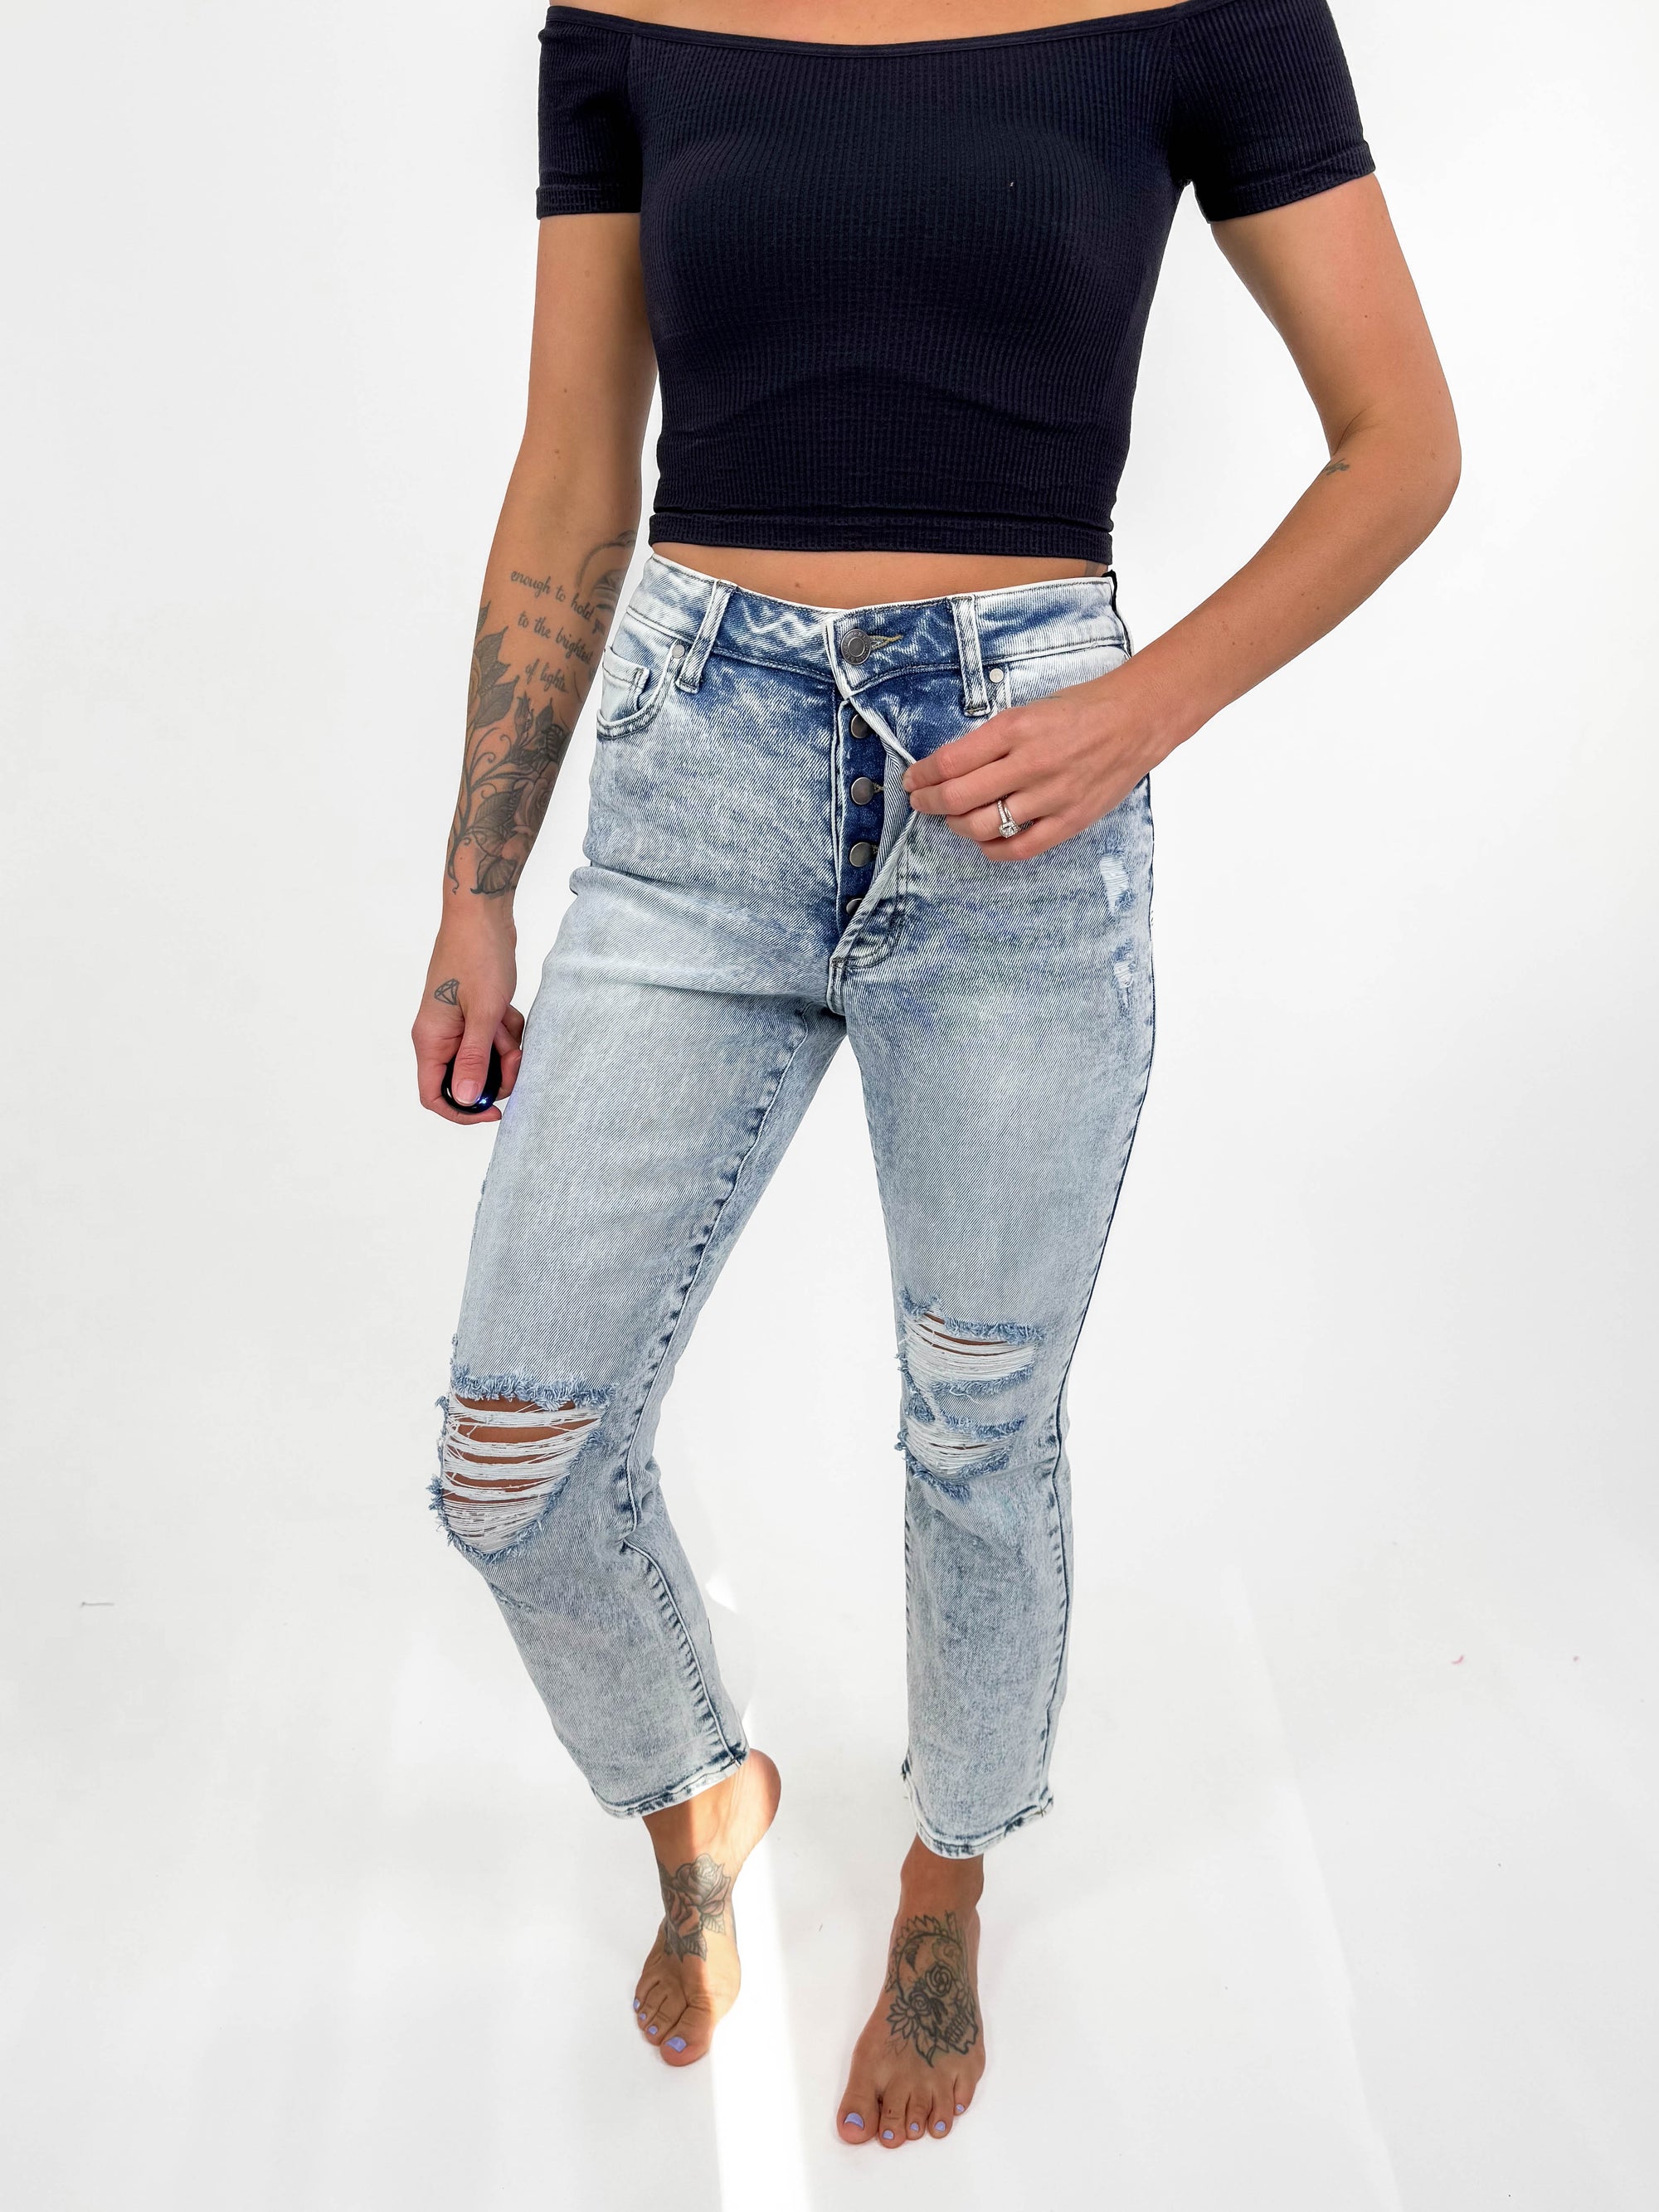 GRACE AND LACE High Waisted Mom Jeans- LIGHT MEDIUM WASH